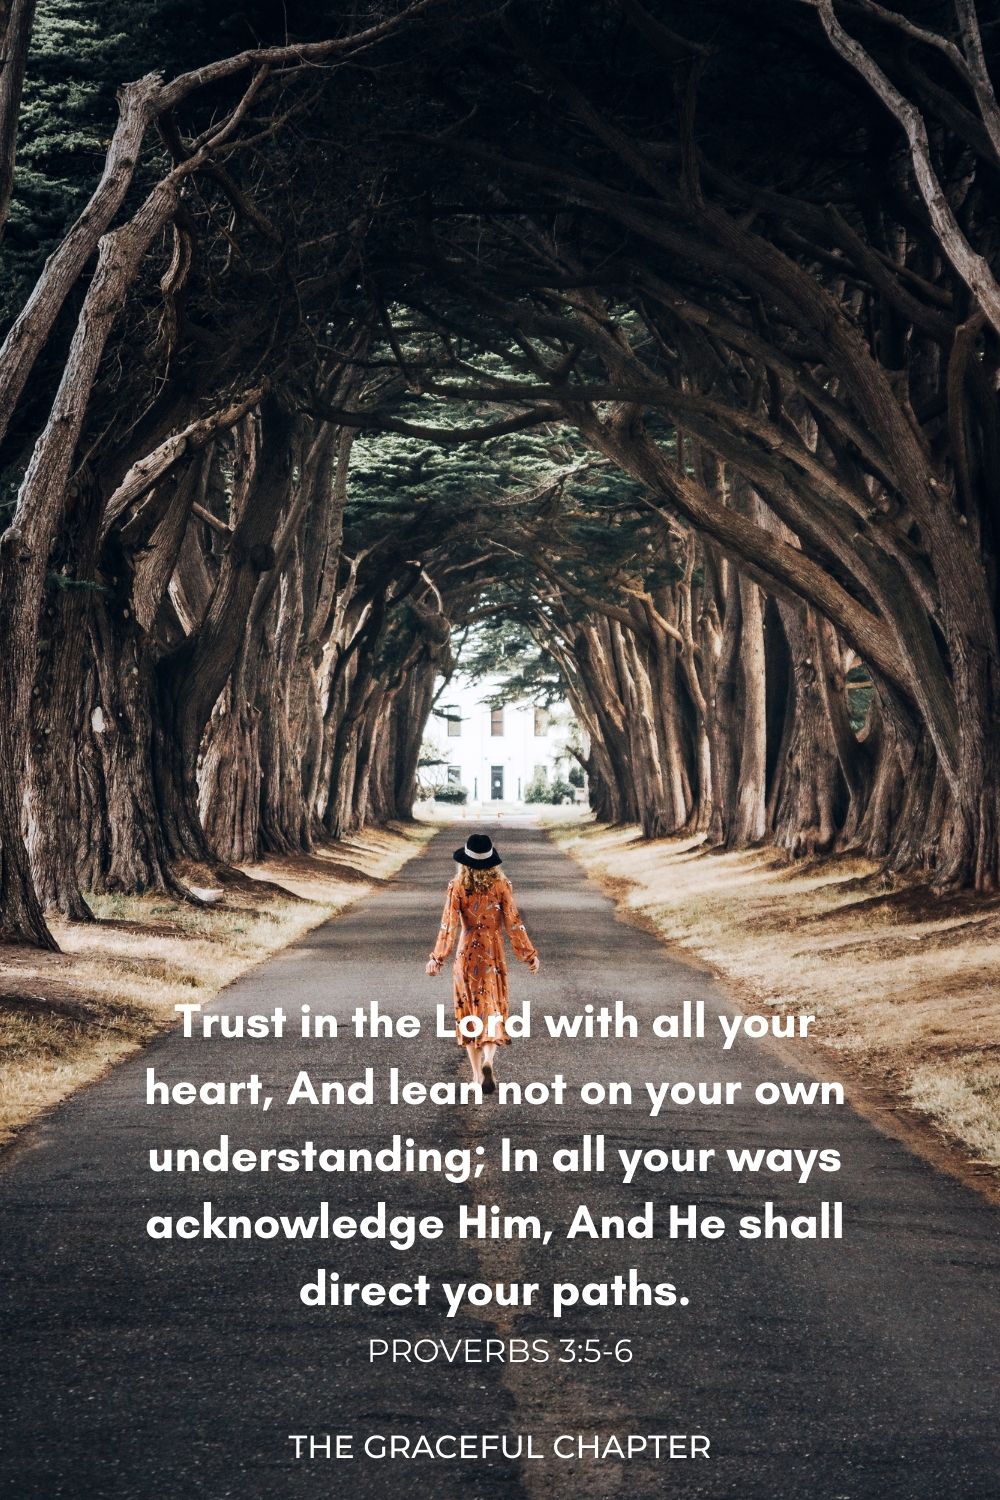 Trust in the Lord with all your heart,
And lean not on your own understanding;
 In all your ways acknowledge Him,
And He shall direct your paths. Proverbs 3:5-6